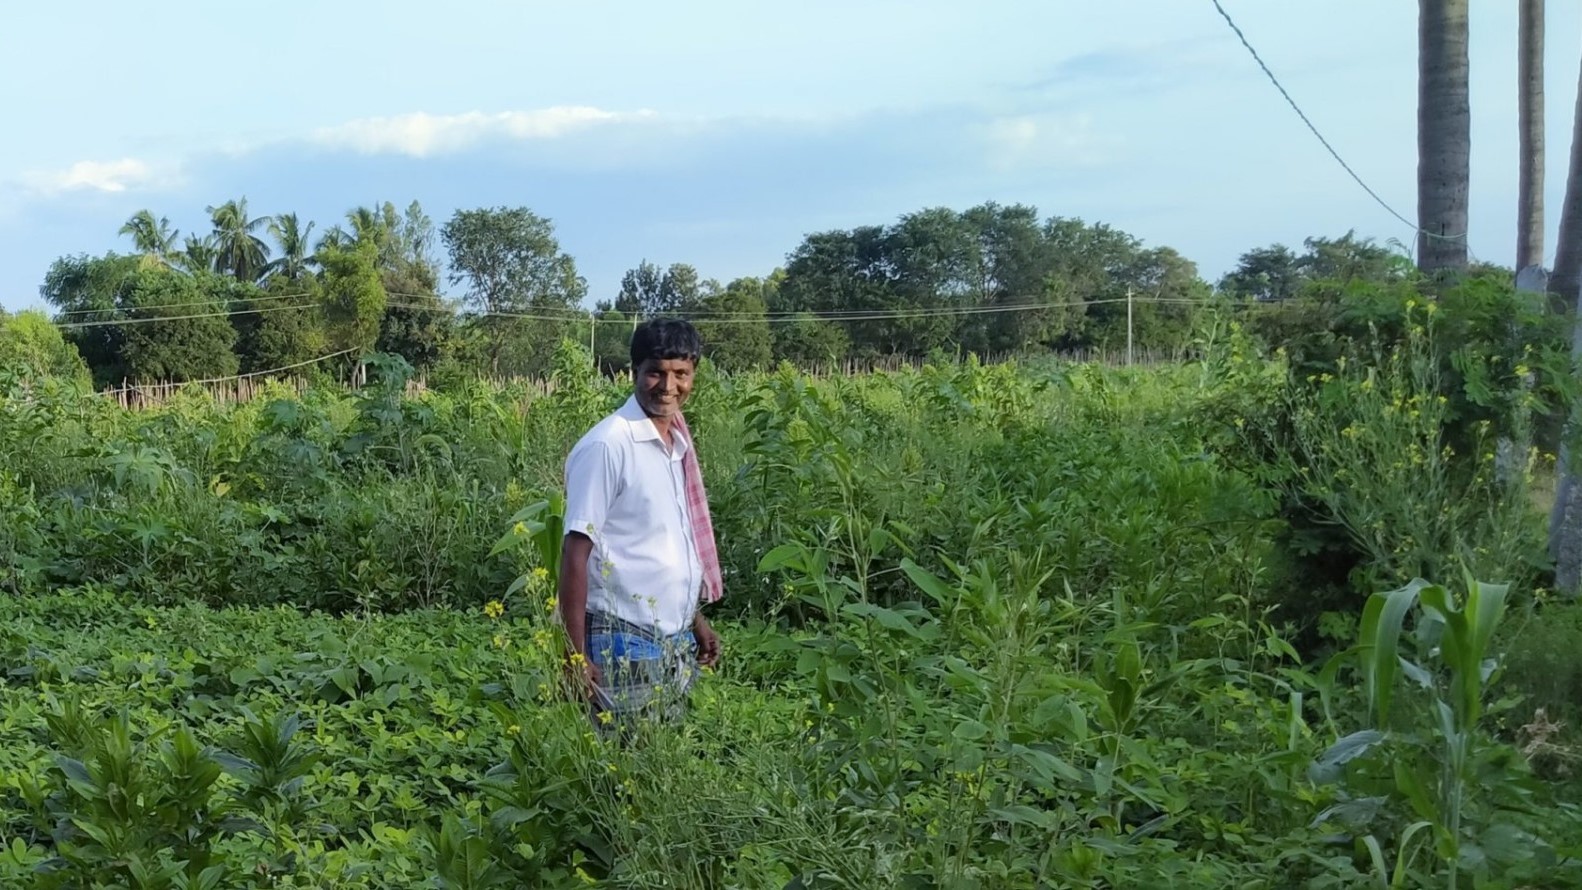 A man standing in a field with different kinds of crops.